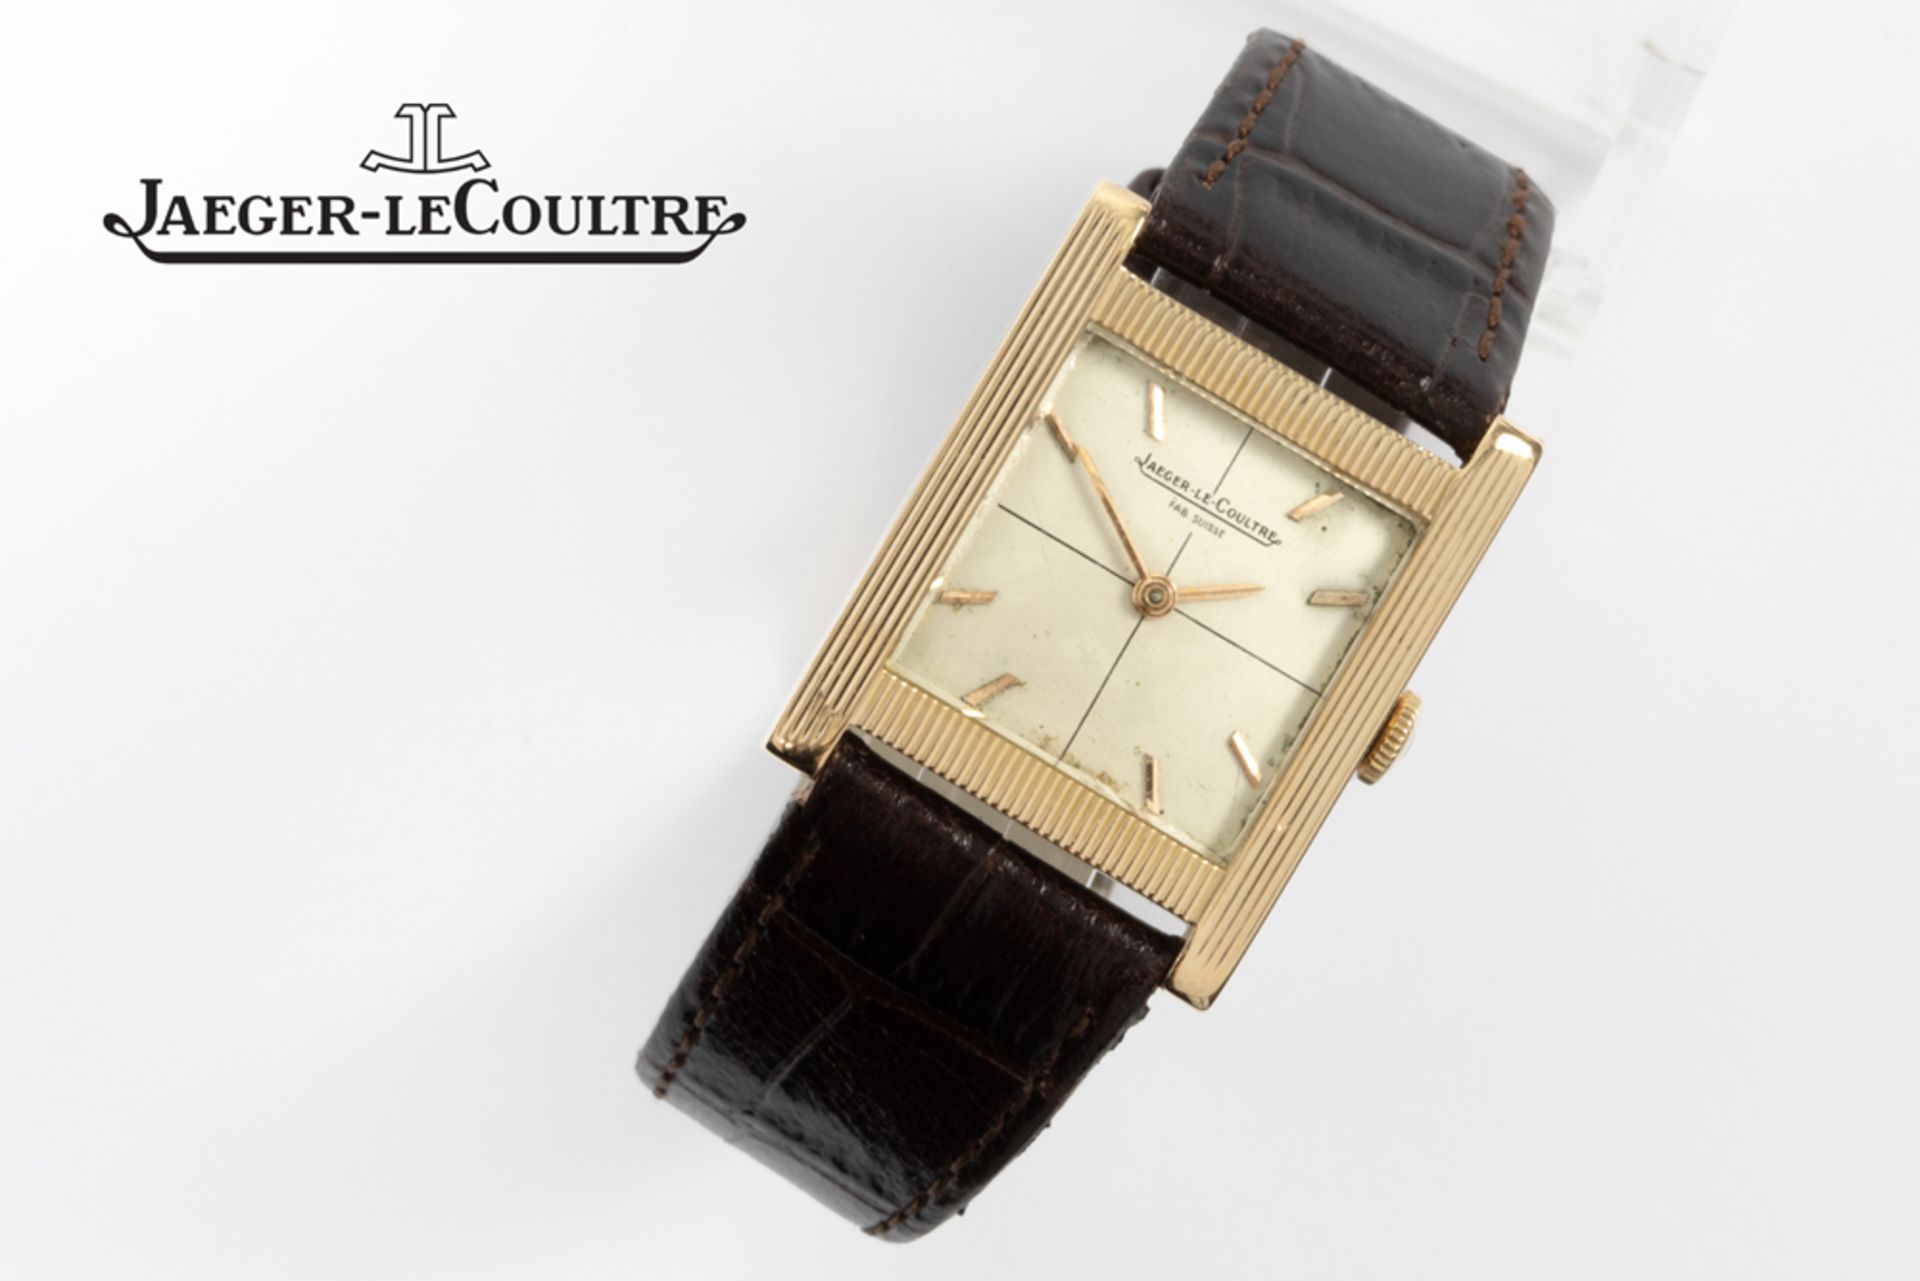 sixties' vintage Jaeger-LeCoultre marked wristwatch in yellow gold (18 carat) || JAEGER -